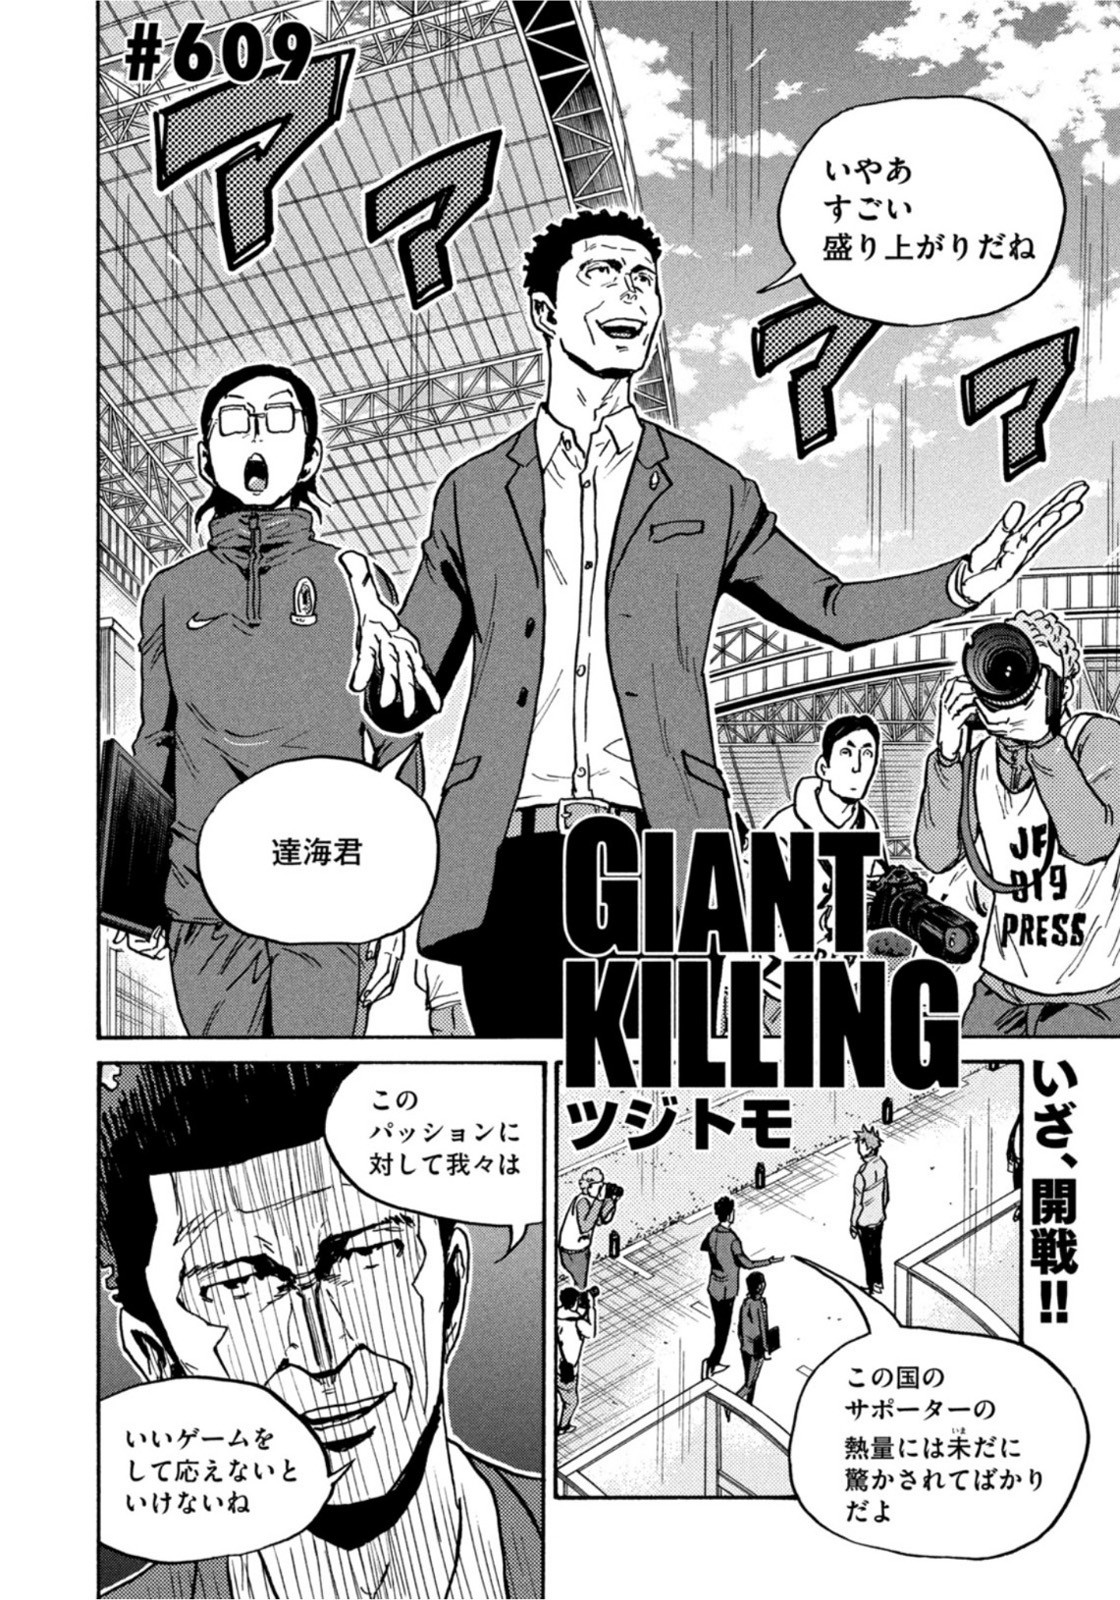 Giant Killing - Chapter 609 - Page 2